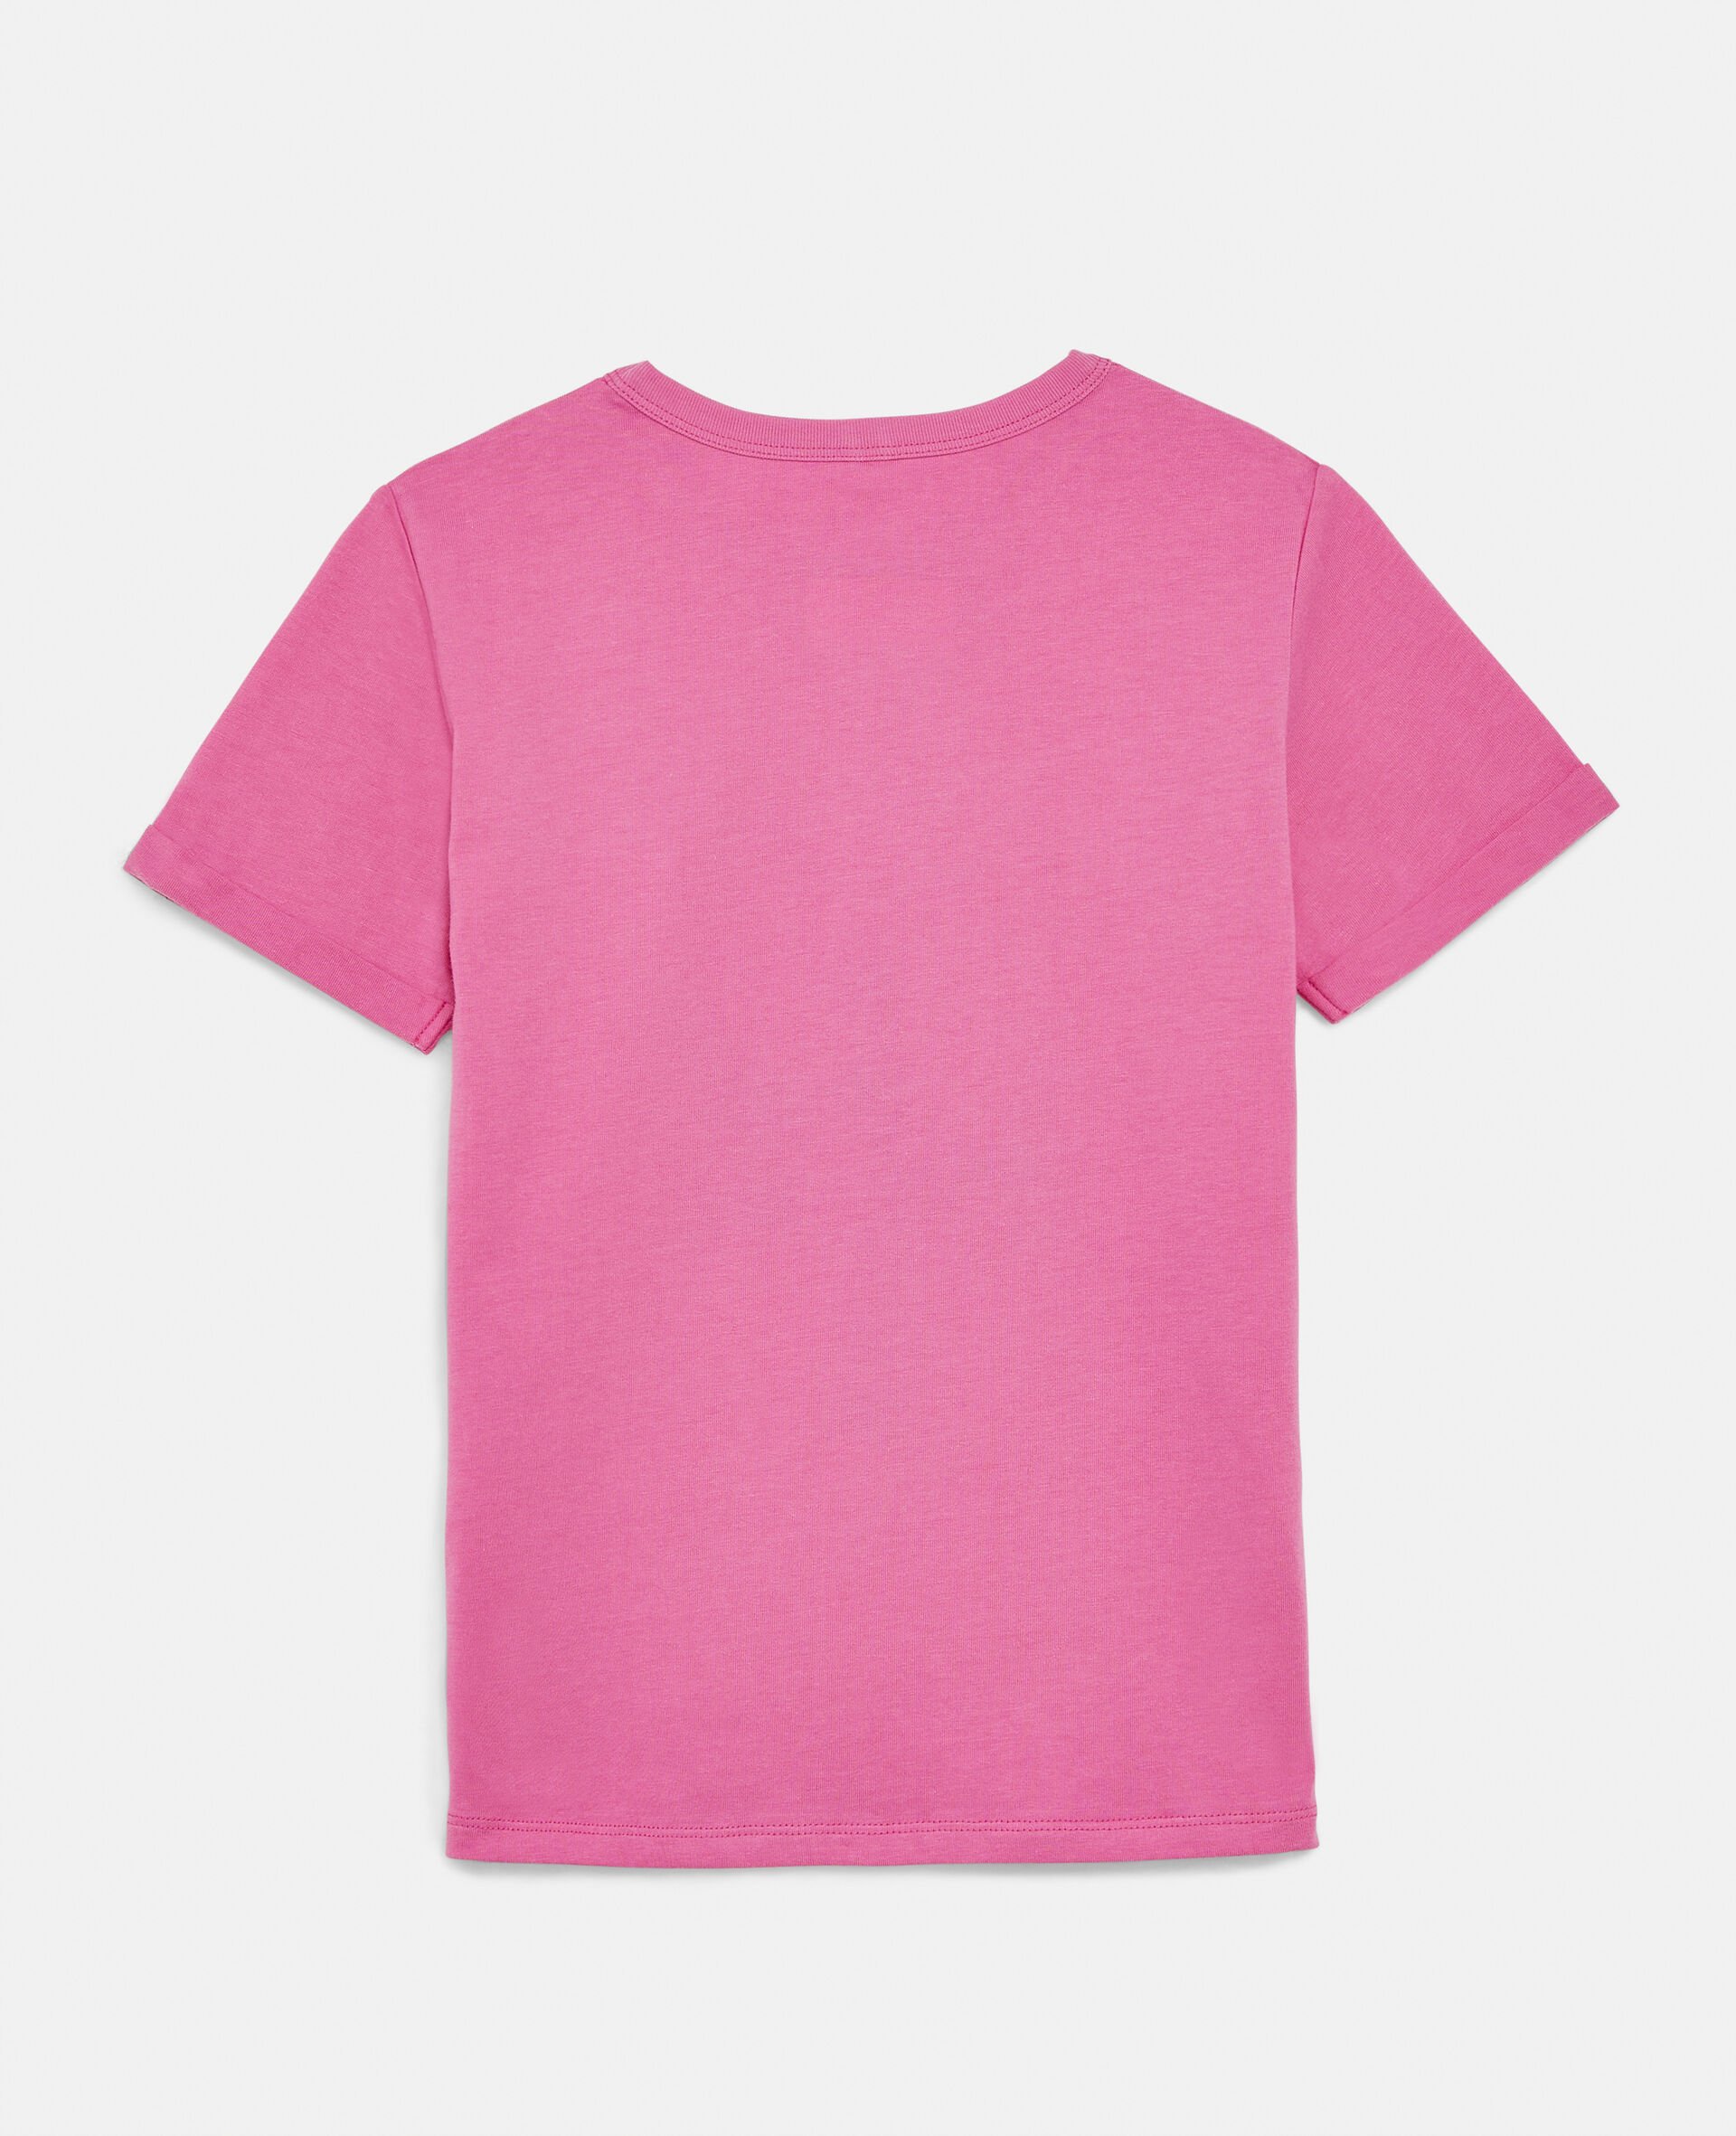 Popsicle Print Cotton T-Shirt-Pink-large image number 2